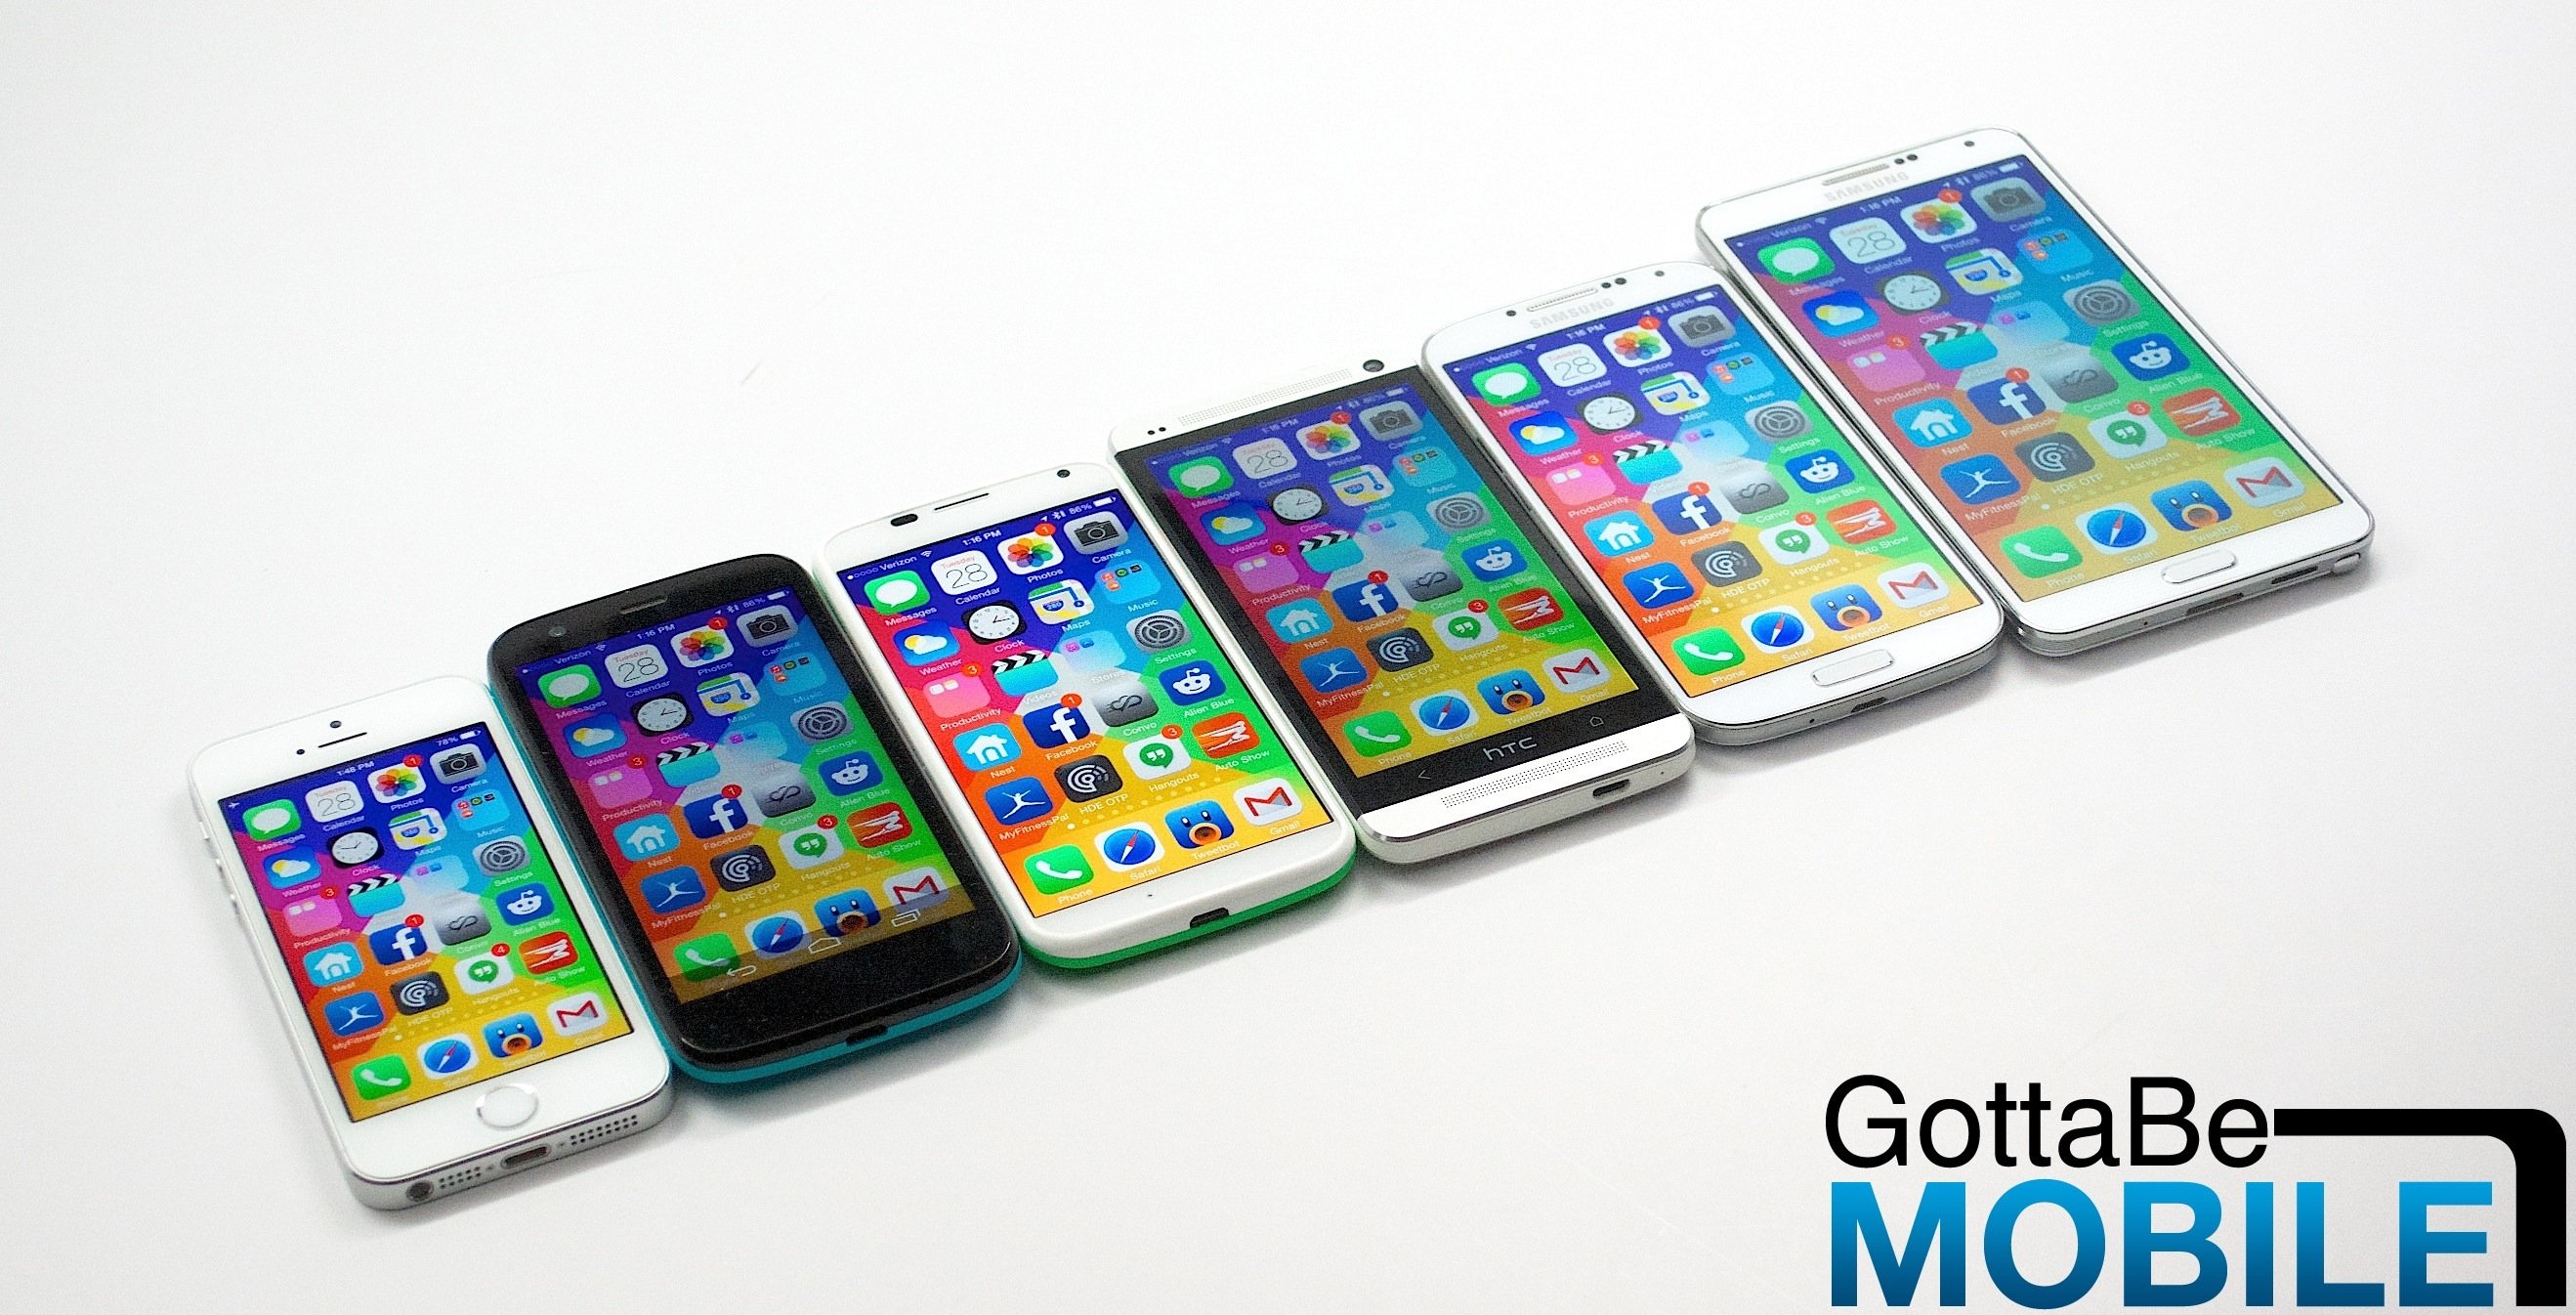 iPhone 6 rumors in March start to take shape.